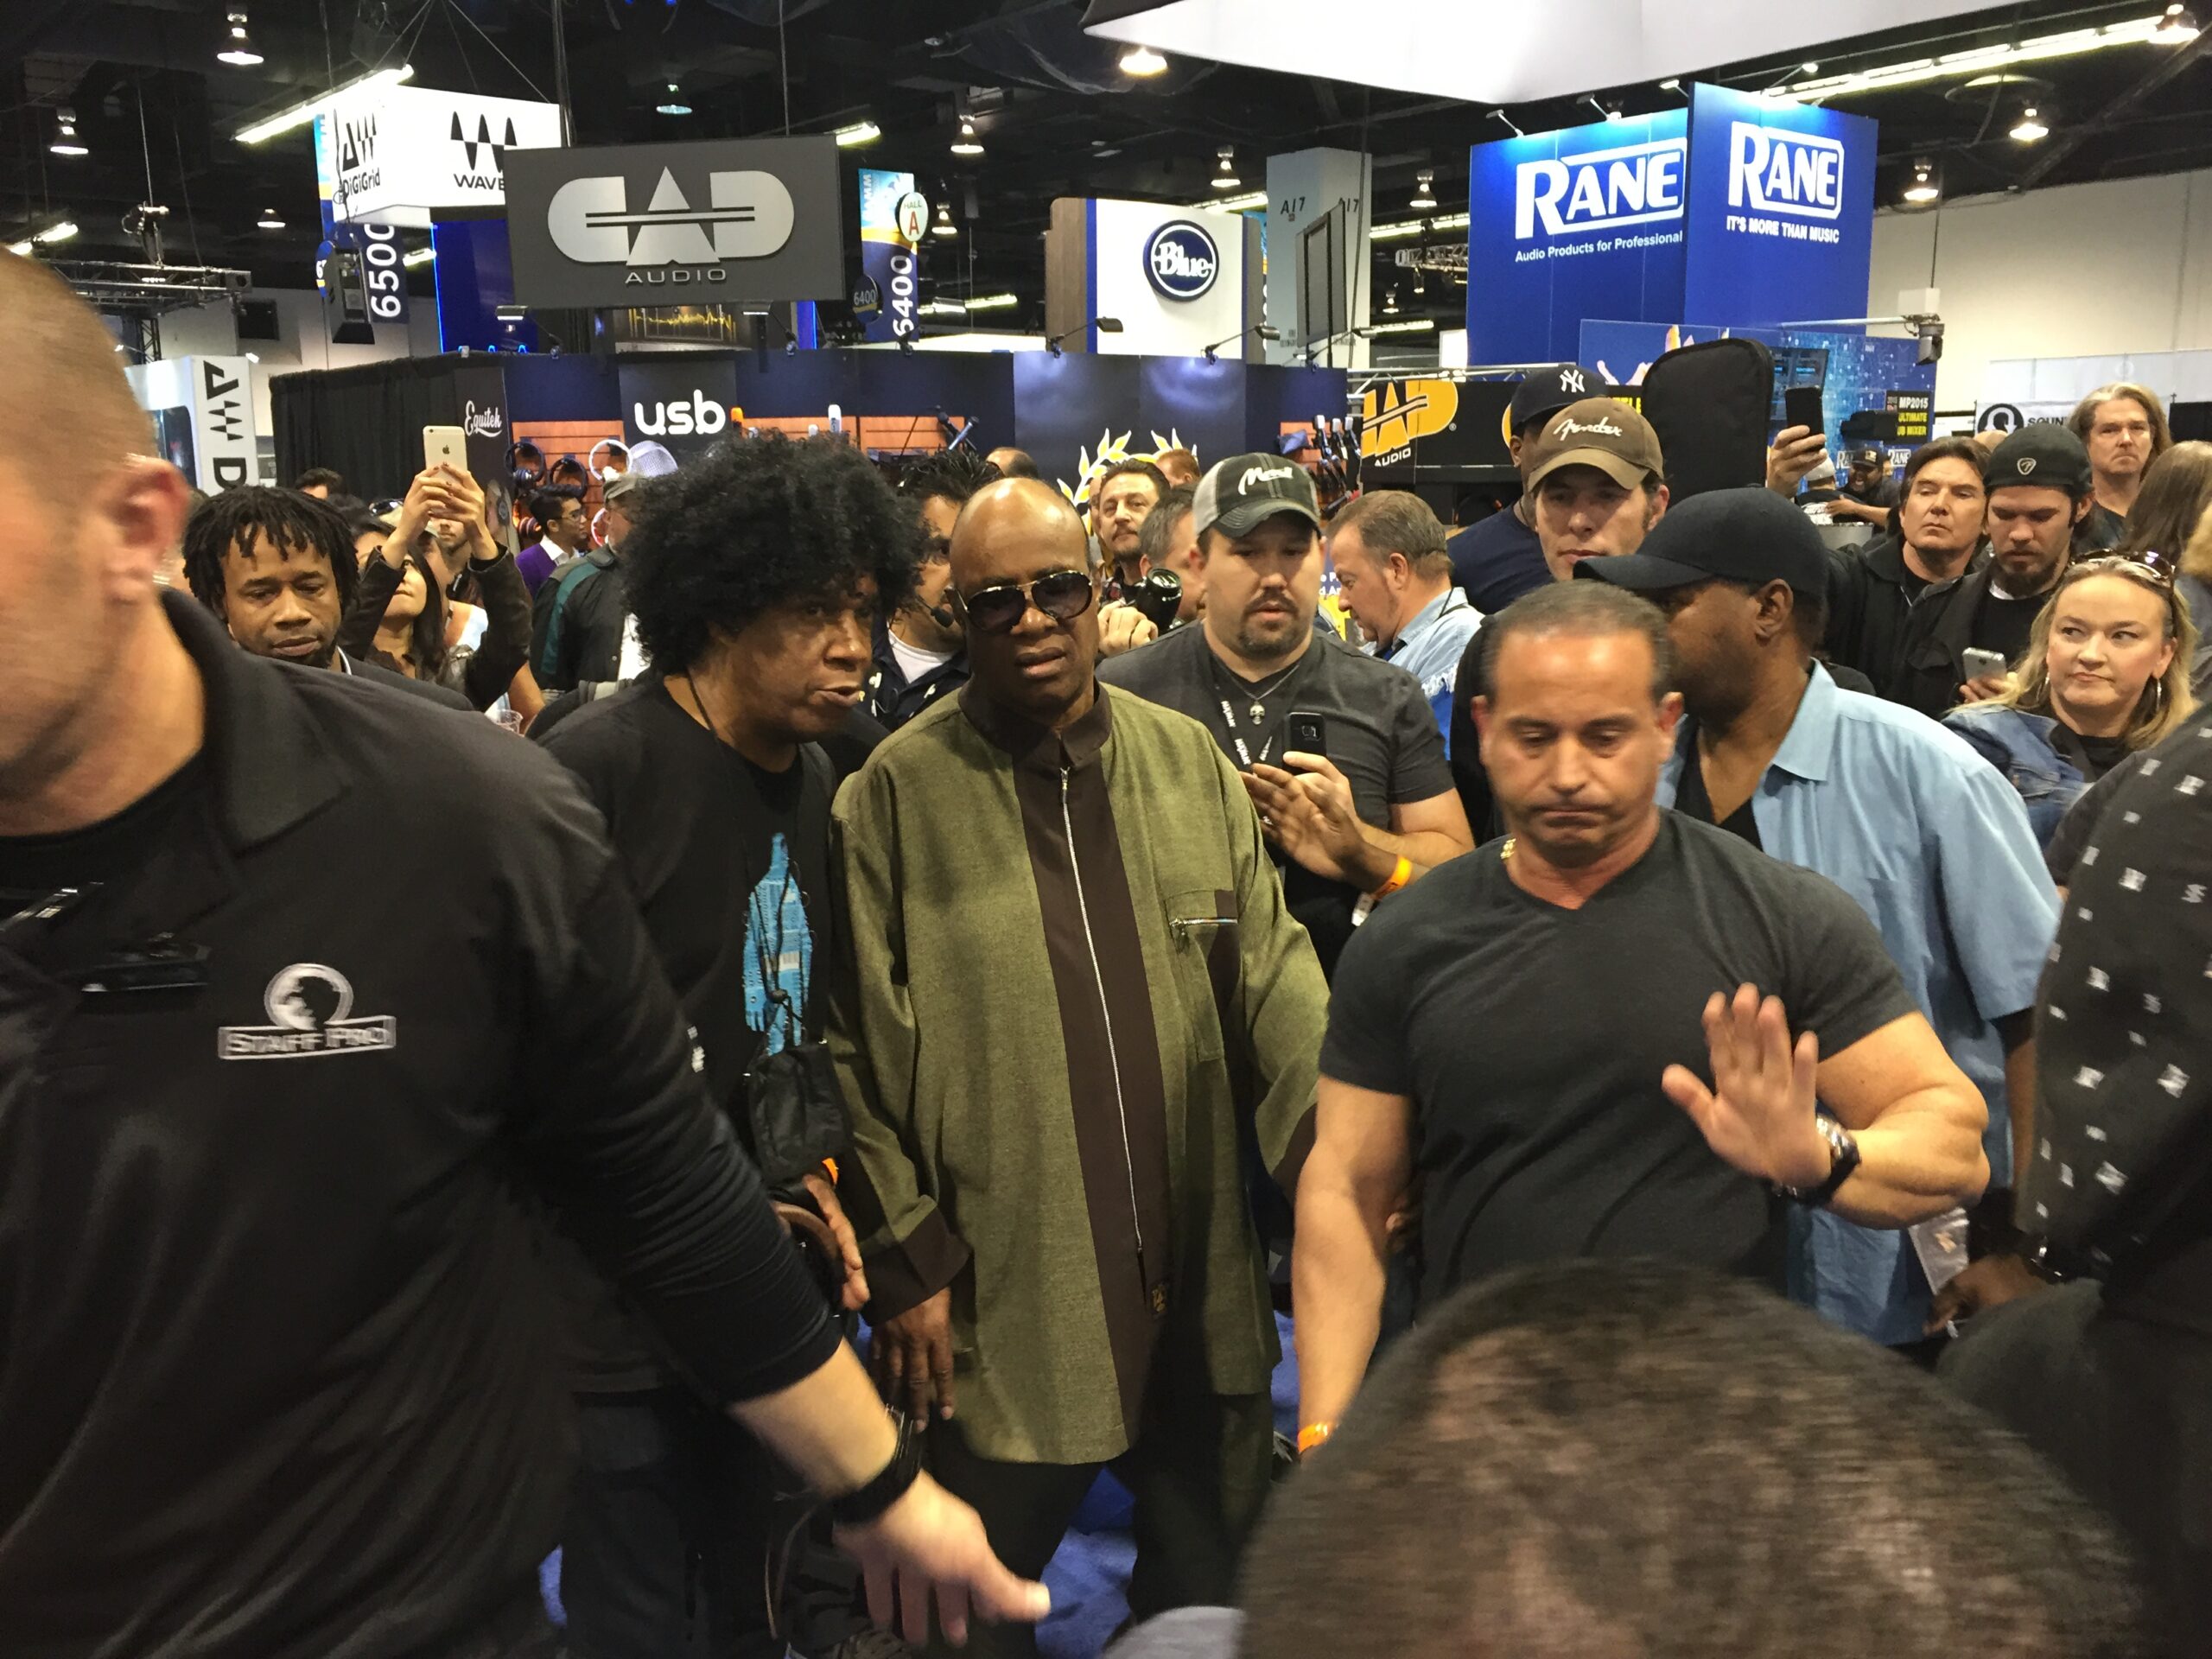 It’s not really a NAMM Show until Stevie Wonder shows up.